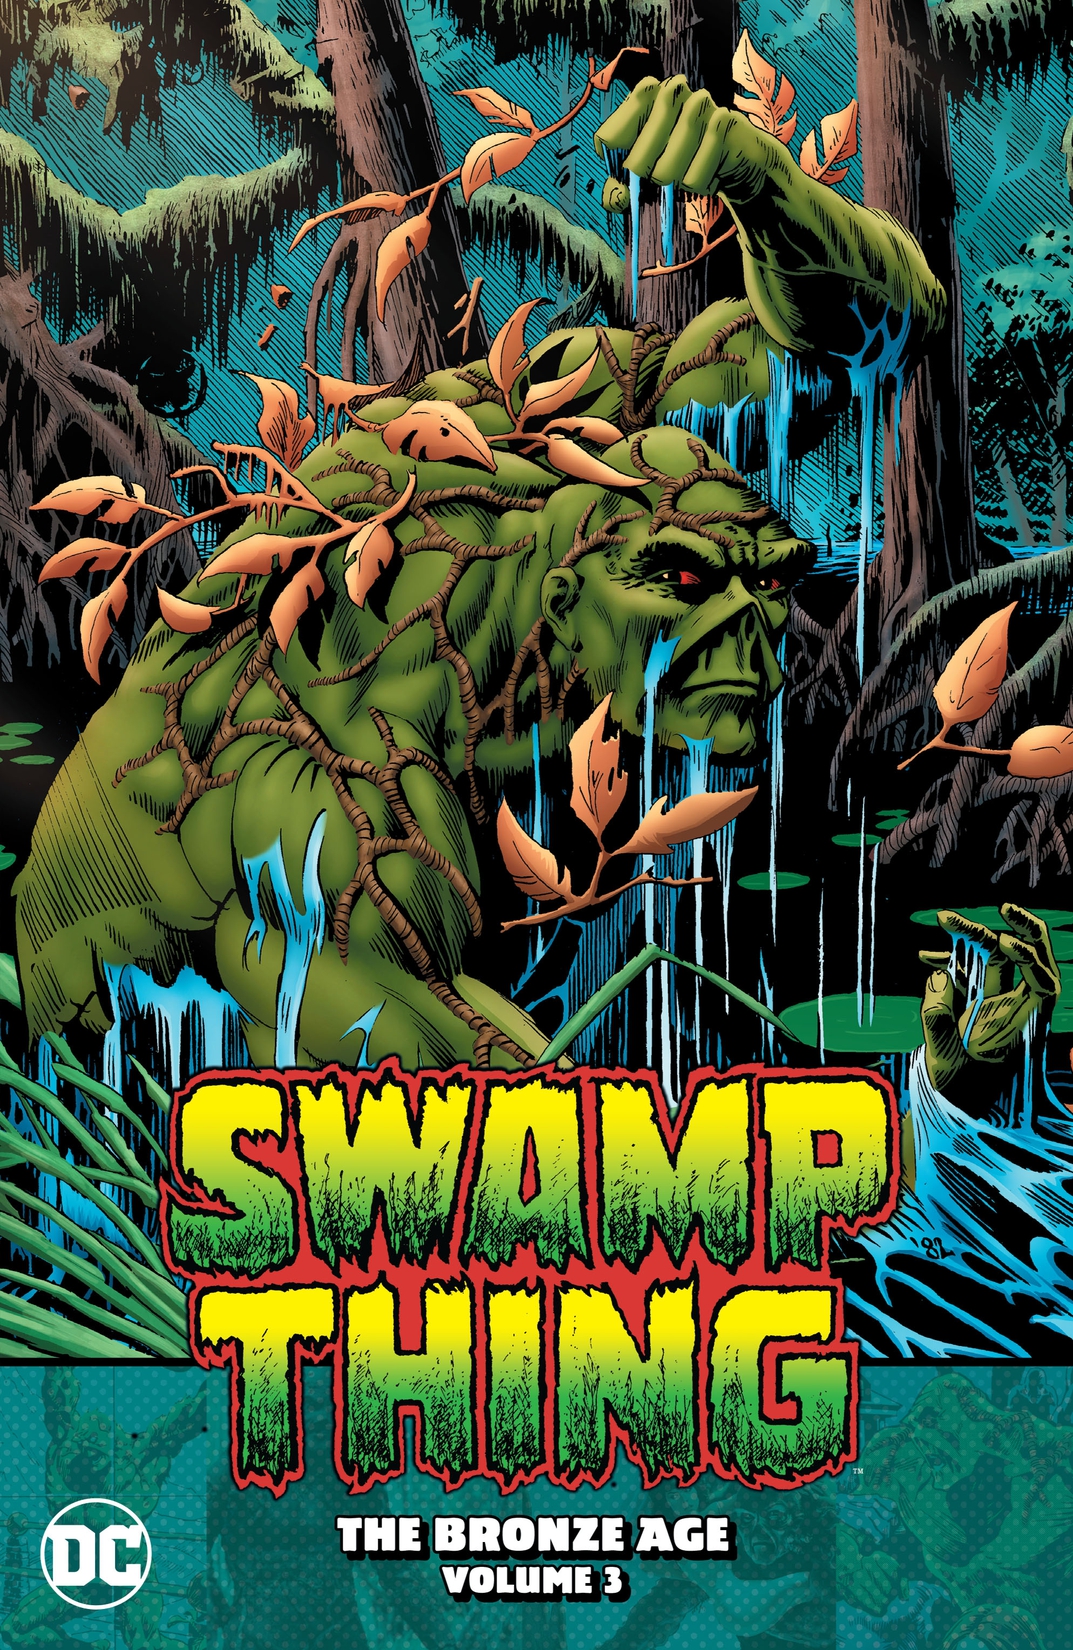 Swamp Thing: The Bronze Age Vol. 3 preview images